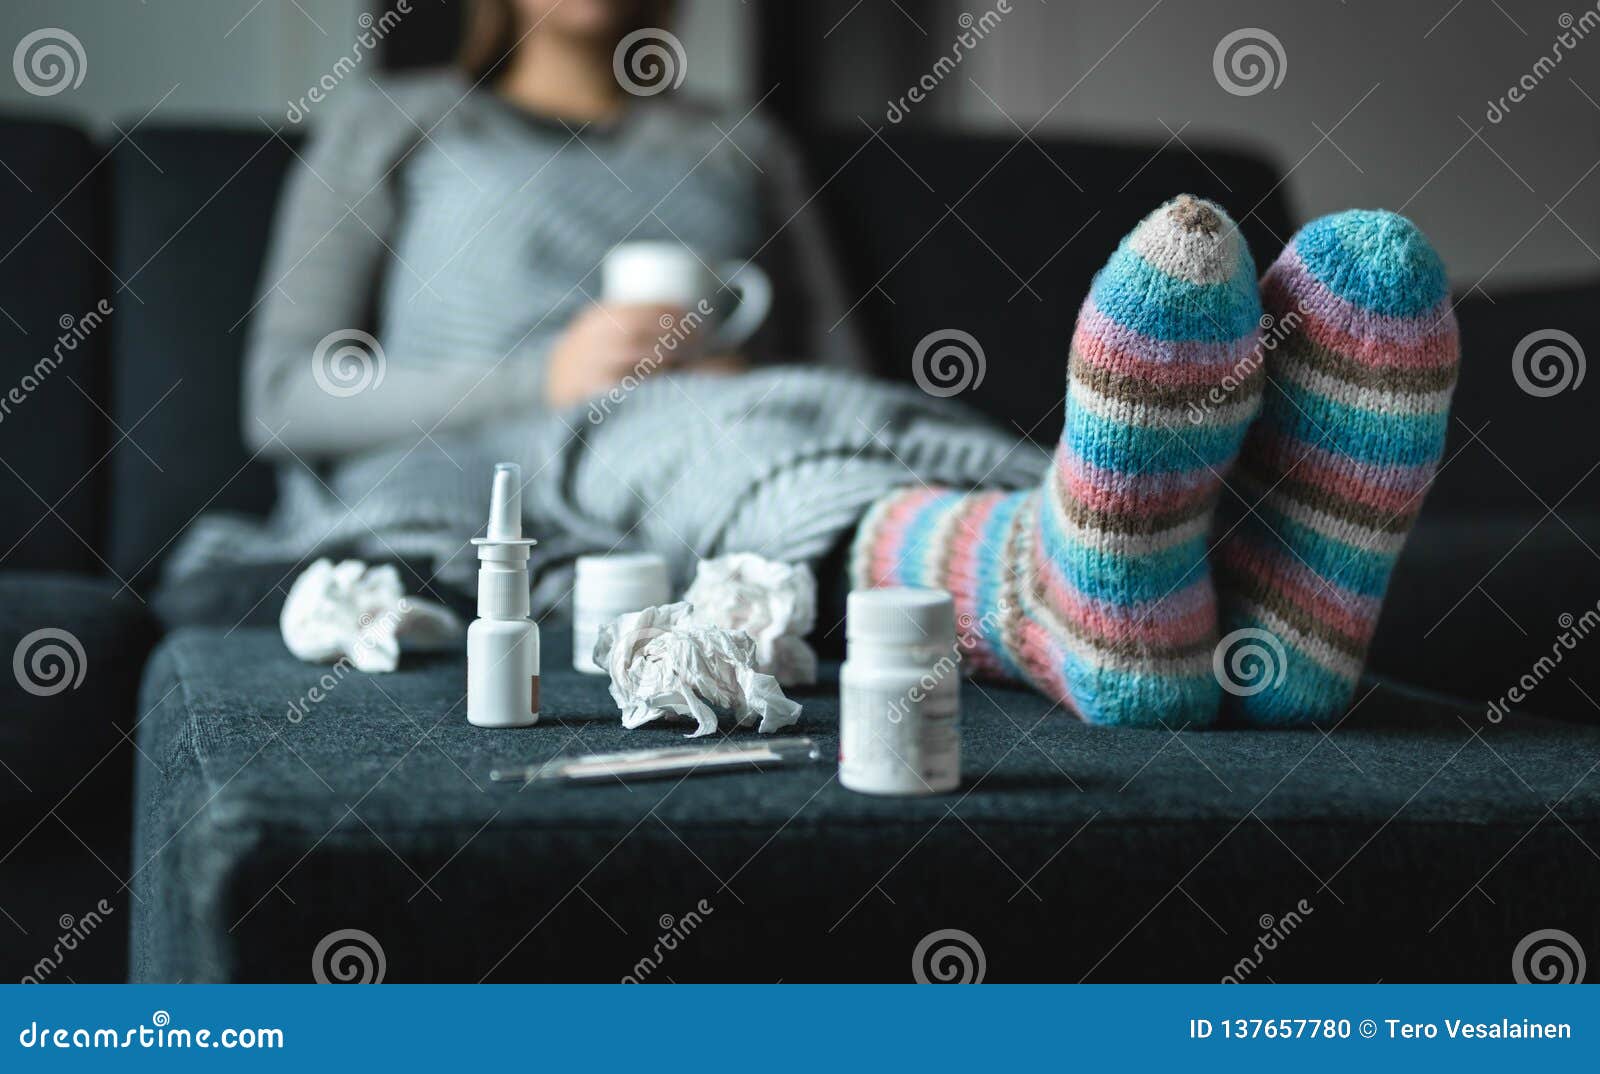 sick woman resting on couch holding hot cup of tea. ill person with flu, cold, fever or virus sitting on sofa at home in winter.